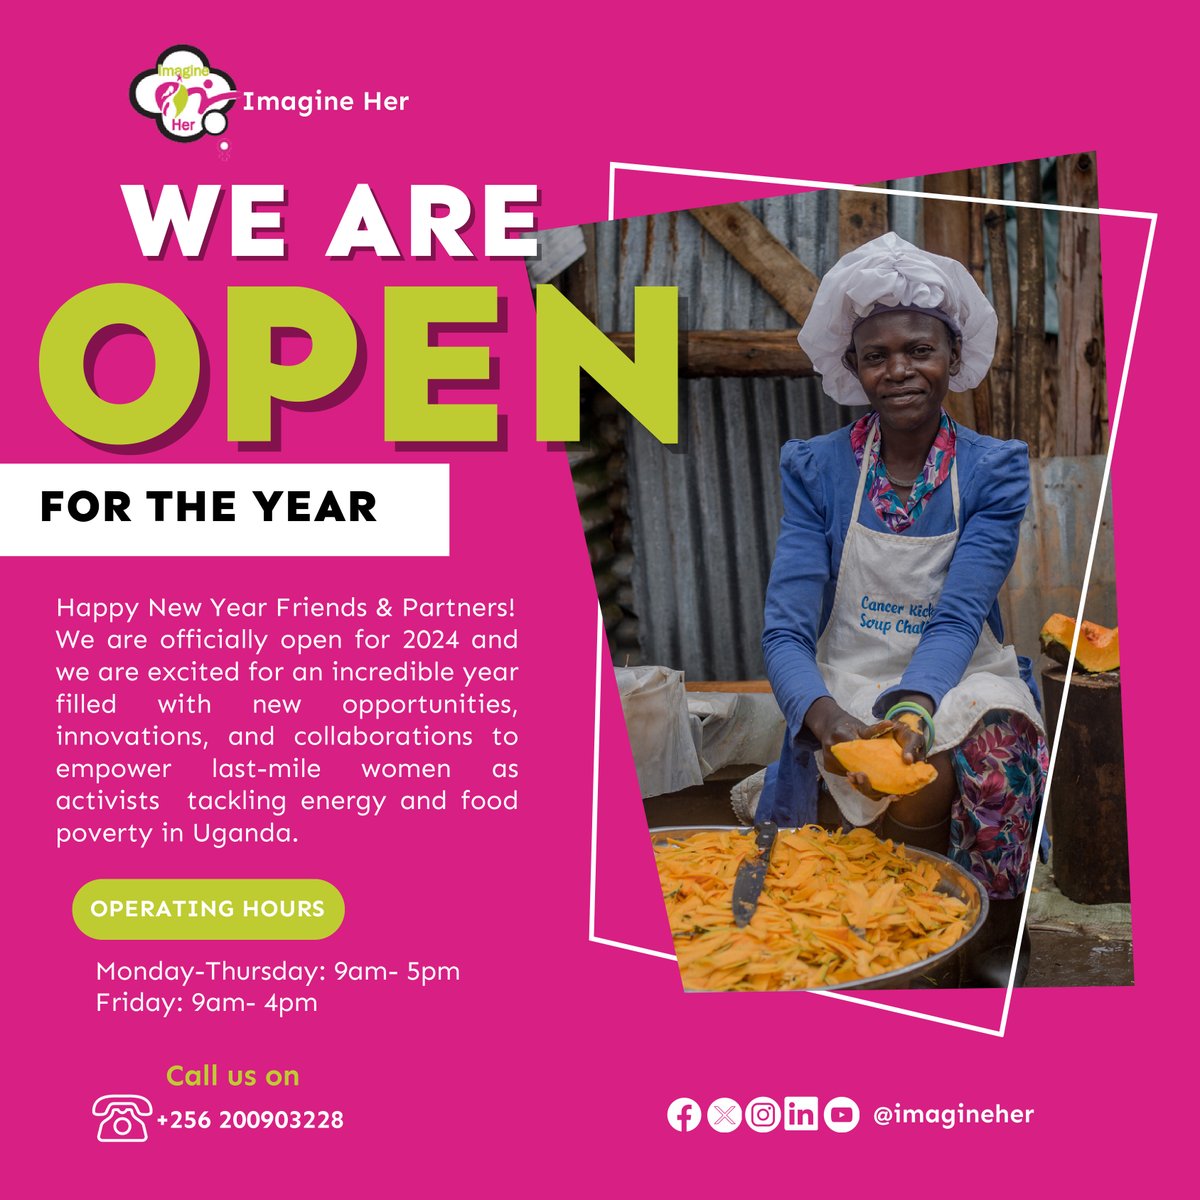 Happy New Year Friends and Partners!🎉 We are open and excited for a year filled with new #opportunities, #innovations, and #collaborations as we empower last-mile young women and youth to tackle #energy, #food, and #housing poverty. imagineher.org